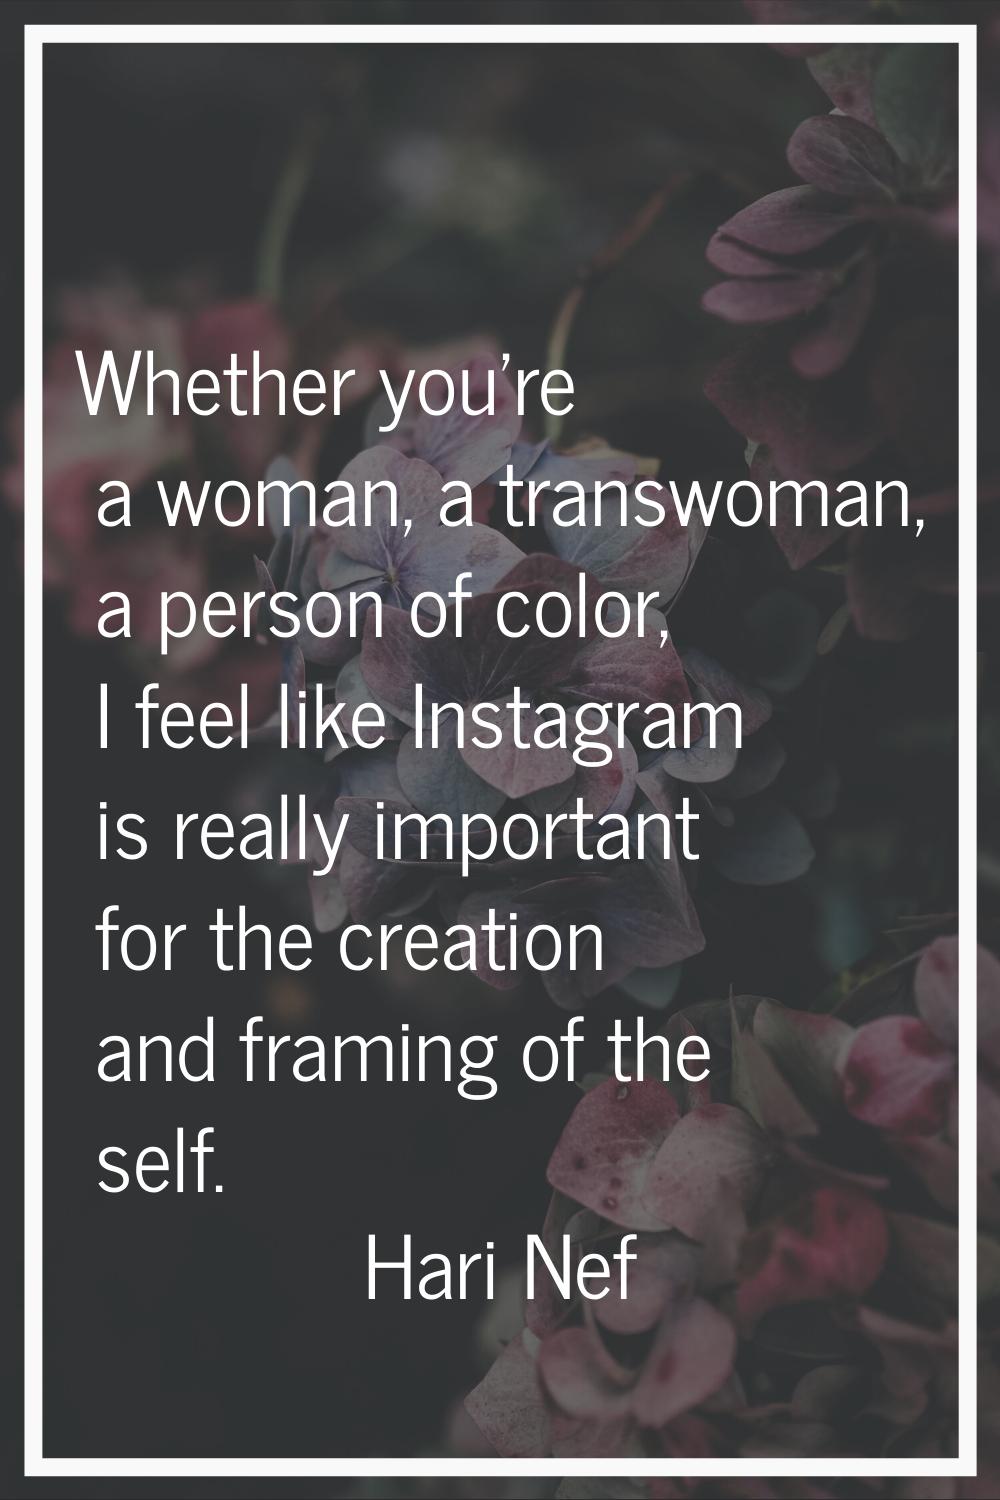 Whether you're a woman, a transwoman, a person of color, I feel like Instagram is really important 